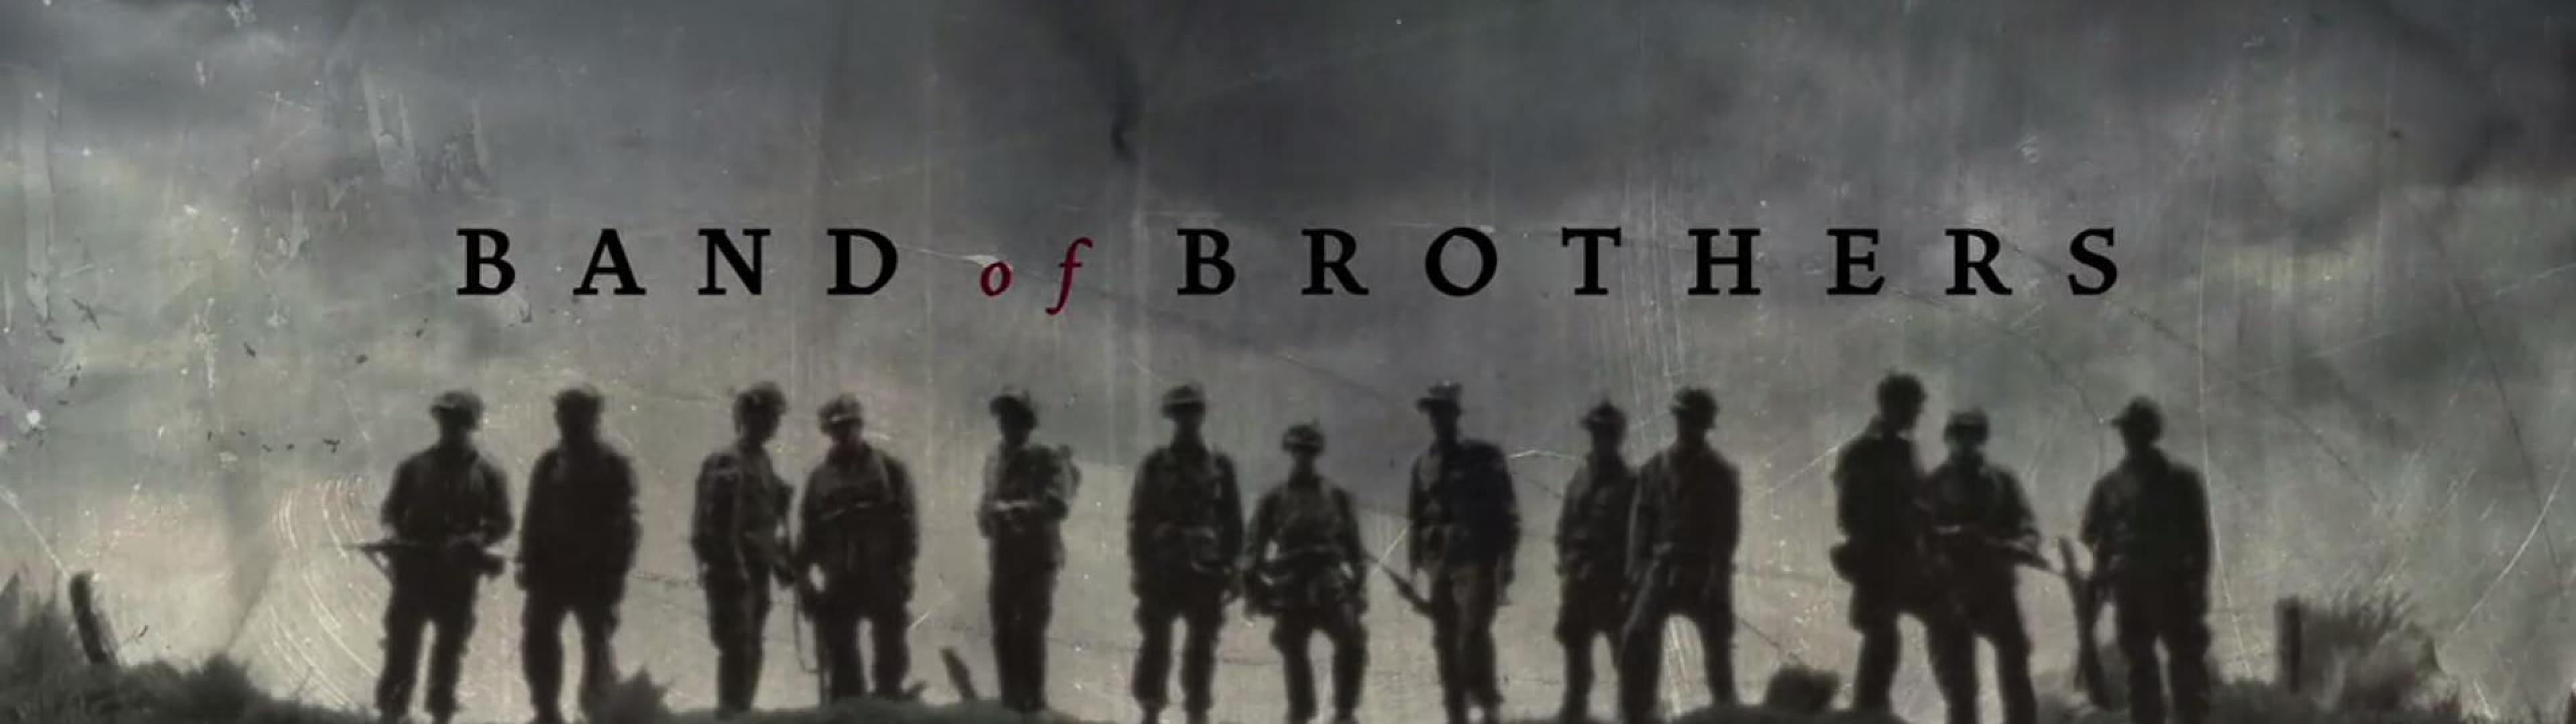 Spears  Band of brothers quotes Band of brothers Historical quotes